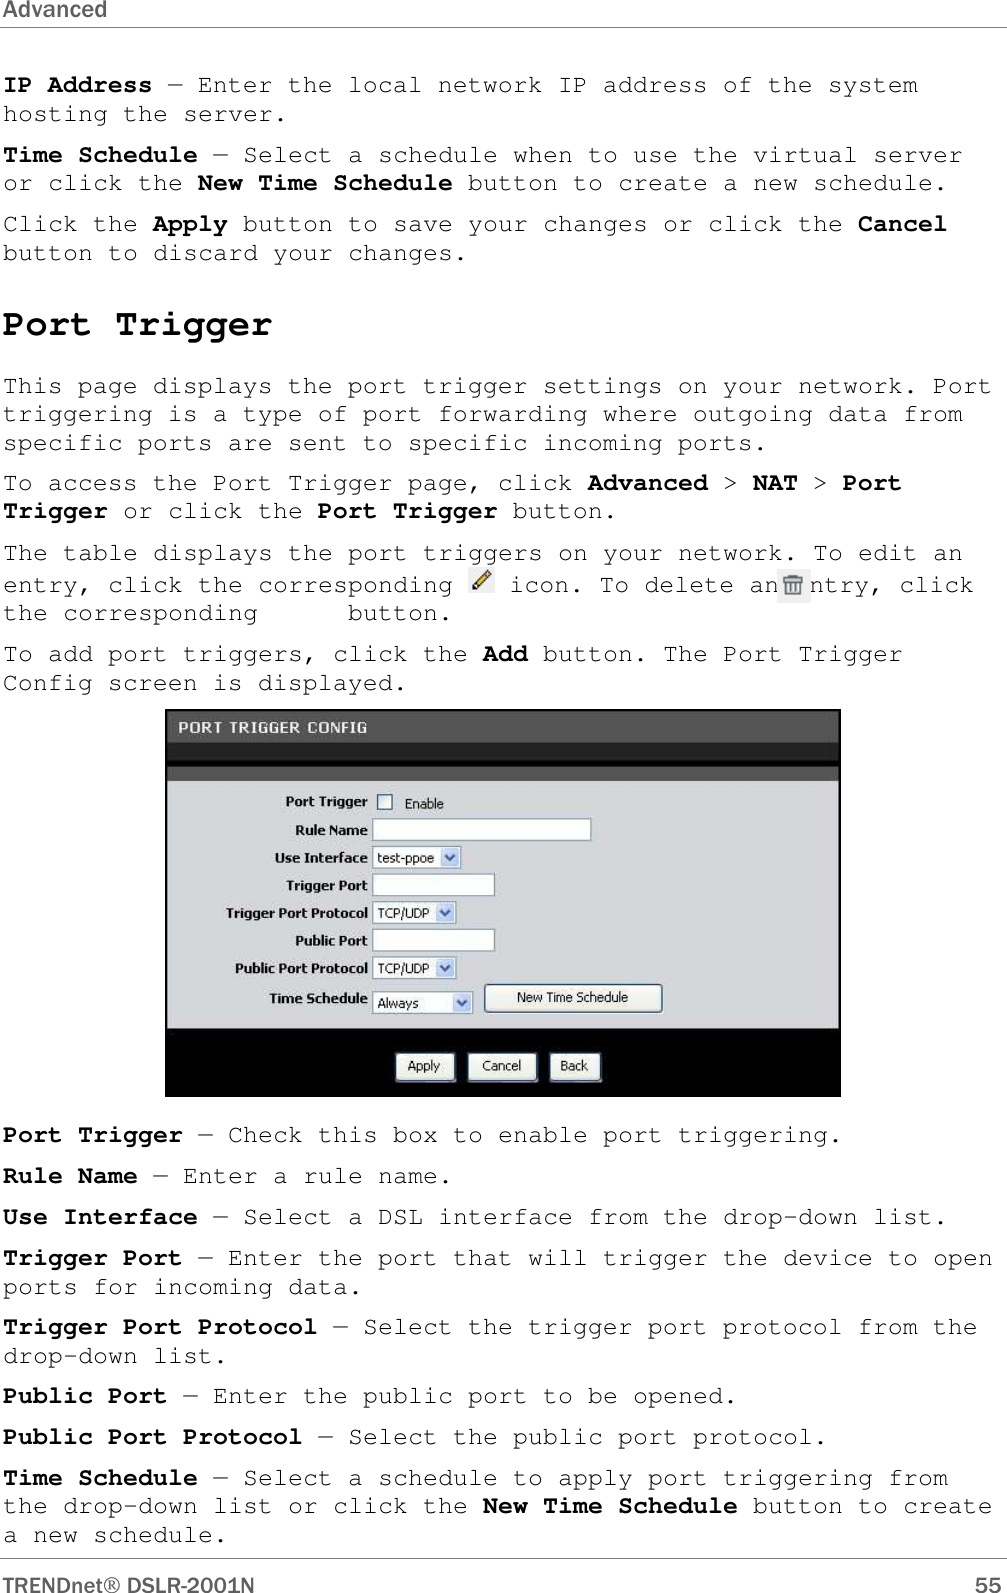 Advanced      TRENDnet DSLR-2001N        55 IP Address — Enter the local network IP address of the system hosting the server. Time Schedule — Select a schedule when to use the virtual server or click the New Time Schedule button to create a new schedule. Click the Apply button to save your changes or click the Cancel button to discard your changes. Port Trigger This page displays the port trigger settings on your network. Port triggering is a type of port forwarding where outgoing data from specific ports are sent to specific incoming ports. To access the Port Trigger page, click Advanced &gt; NAT &gt; Port Trigger or click the Port Trigger button. The table displays the port triggers on your network. To edit an entry, click the corresponding   icon. To delete an entry, click the corresponding      button. To add port triggers, click the Add button. The Port Trigger Config screen is displayed.  Port Trigger — Check this box to enable port triggering. Rule Name — Enter a rule name. Use Interface — Select a DSL interface from the drop-down list. Trigger Port — Enter the port that will trigger the device to open ports for incoming data. Trigger Port Protocol — Select the trigger port protocol from the drop-down list. Public Port — Enter the public port to be opened. Public Port Protocol — Select the public port protocol. Time Schedule — Select a schedule to apply port triggering from the drop-down list or click the New Time Schedule button to create a new schedule.  